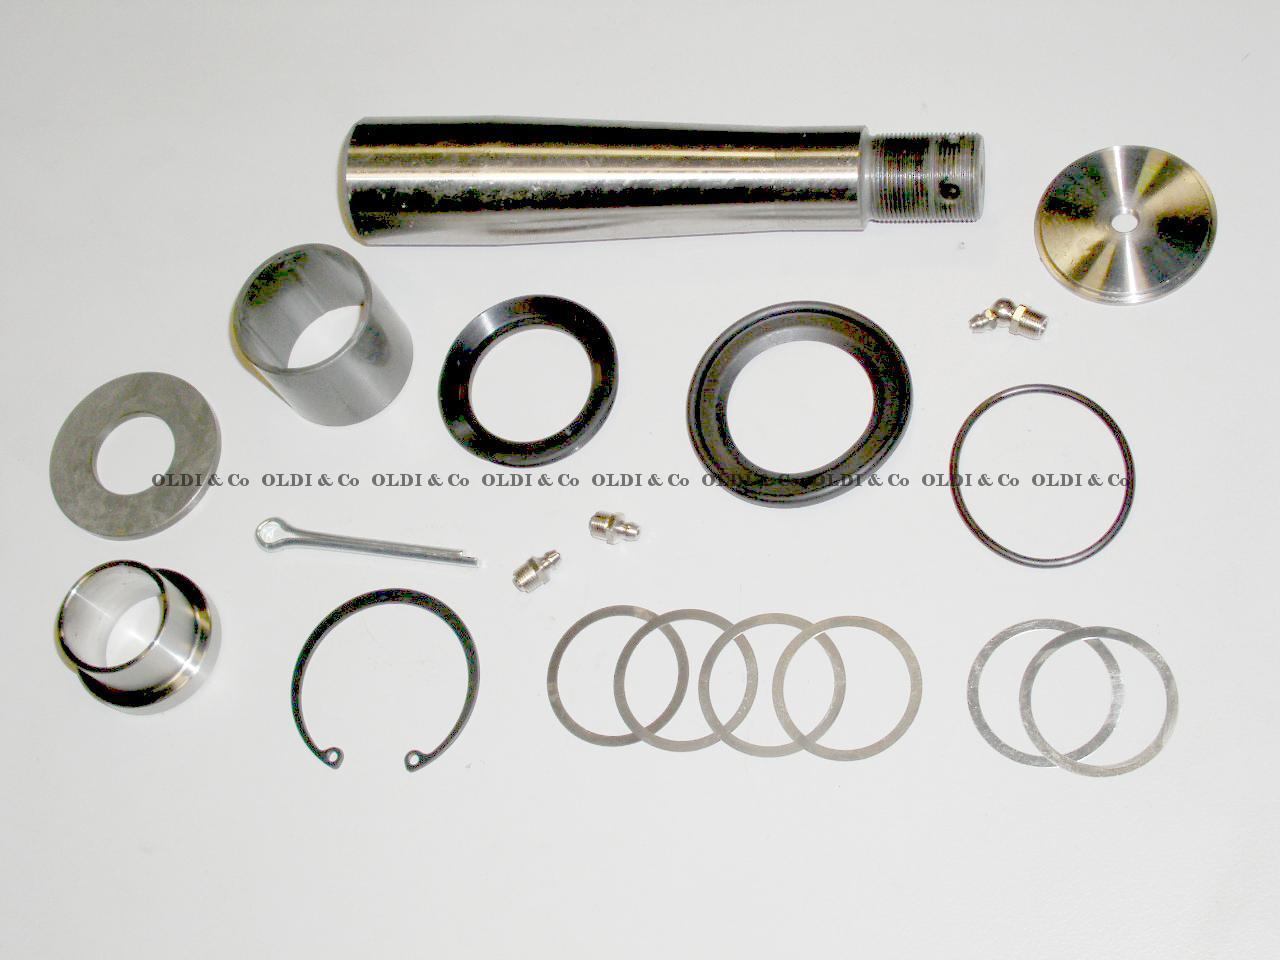 34.074.01691 Suspension parts → King pin - steering knuckle rep. kit